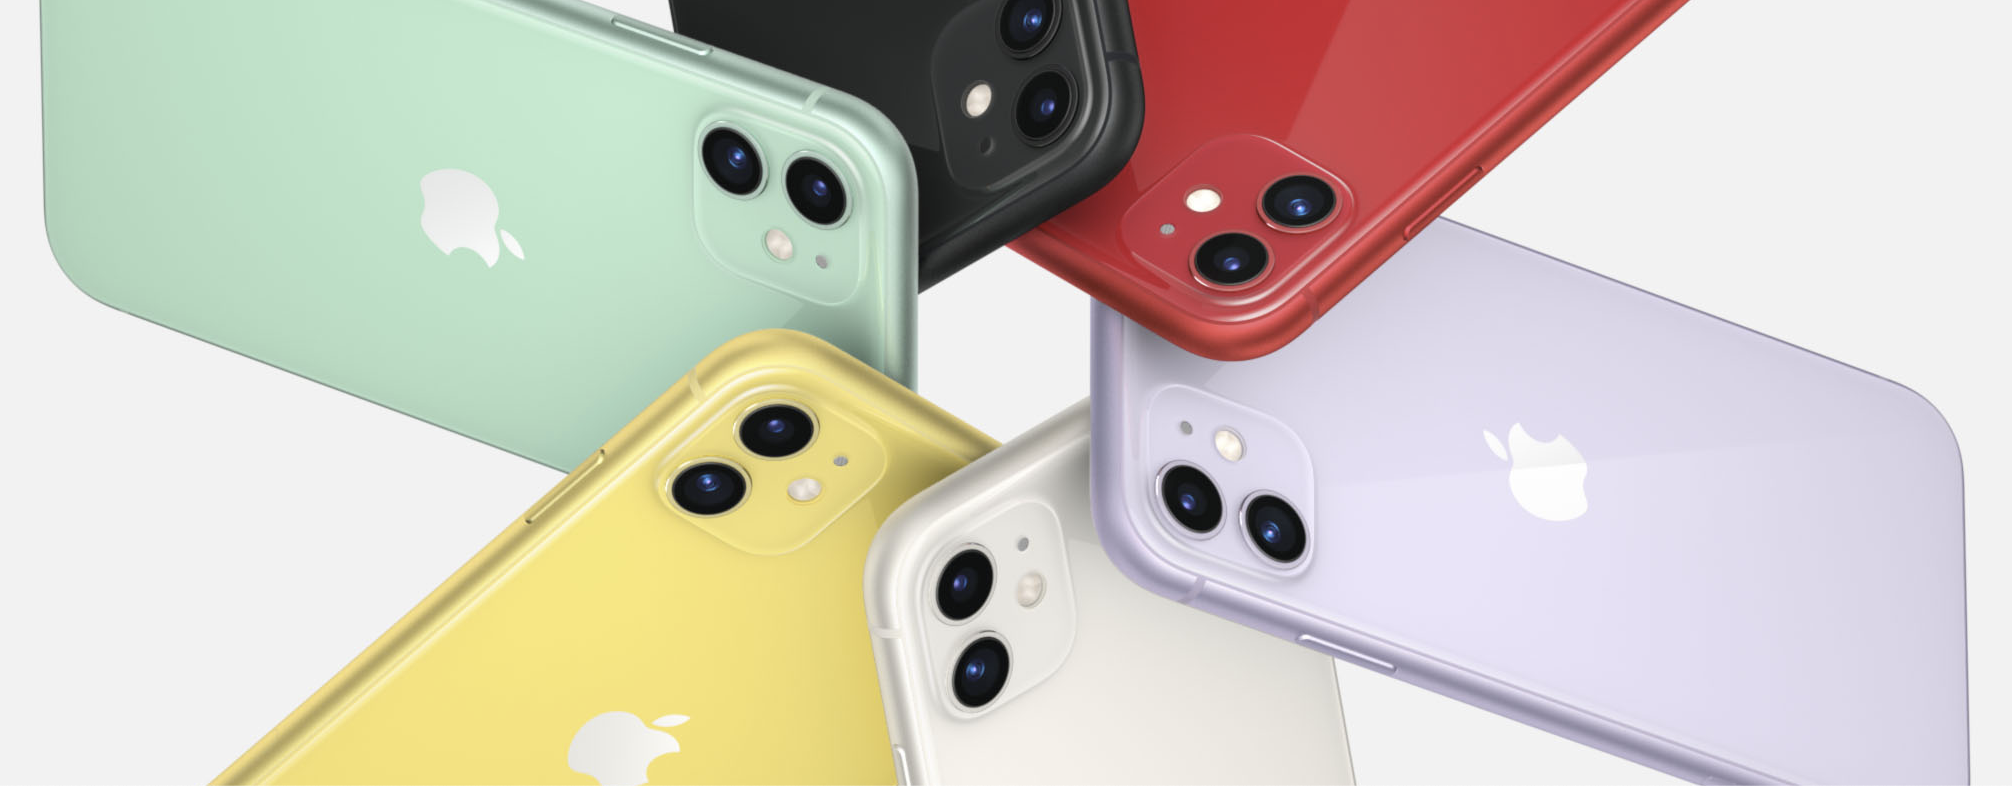 What Your Iphone 11 Iphone 11 Pro Or Iphone 11 Pro Max Color Choice Says About You Techrepublic